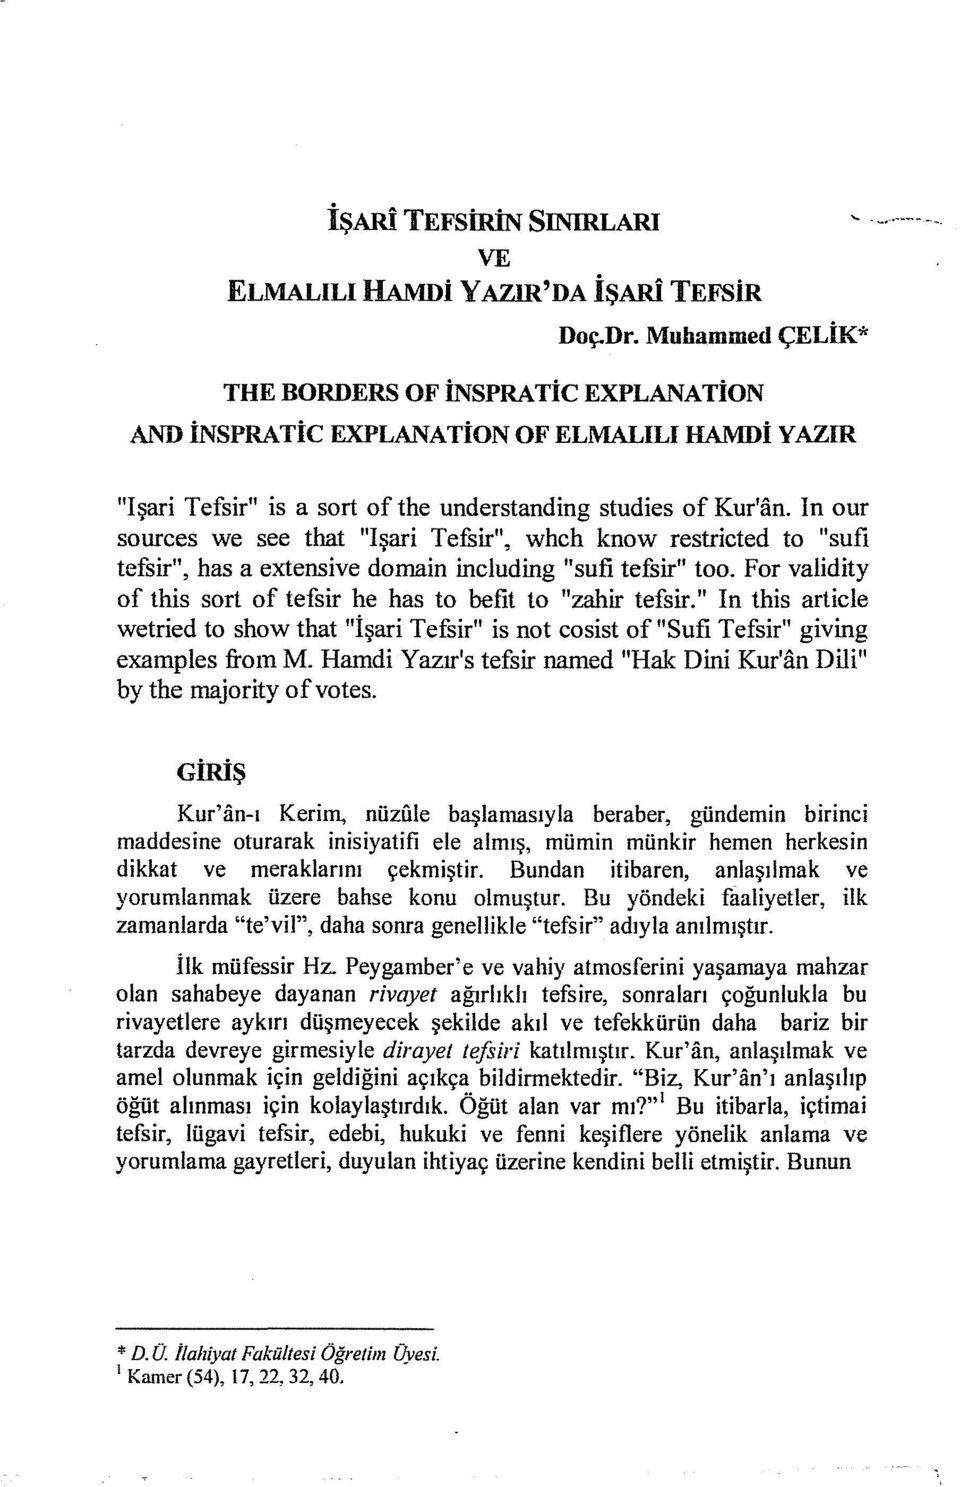 In our sources we see that "Işari Tefsir", whch know restricted to "sufı tefsir", has a extensive domain including "sufi tefsir" too.